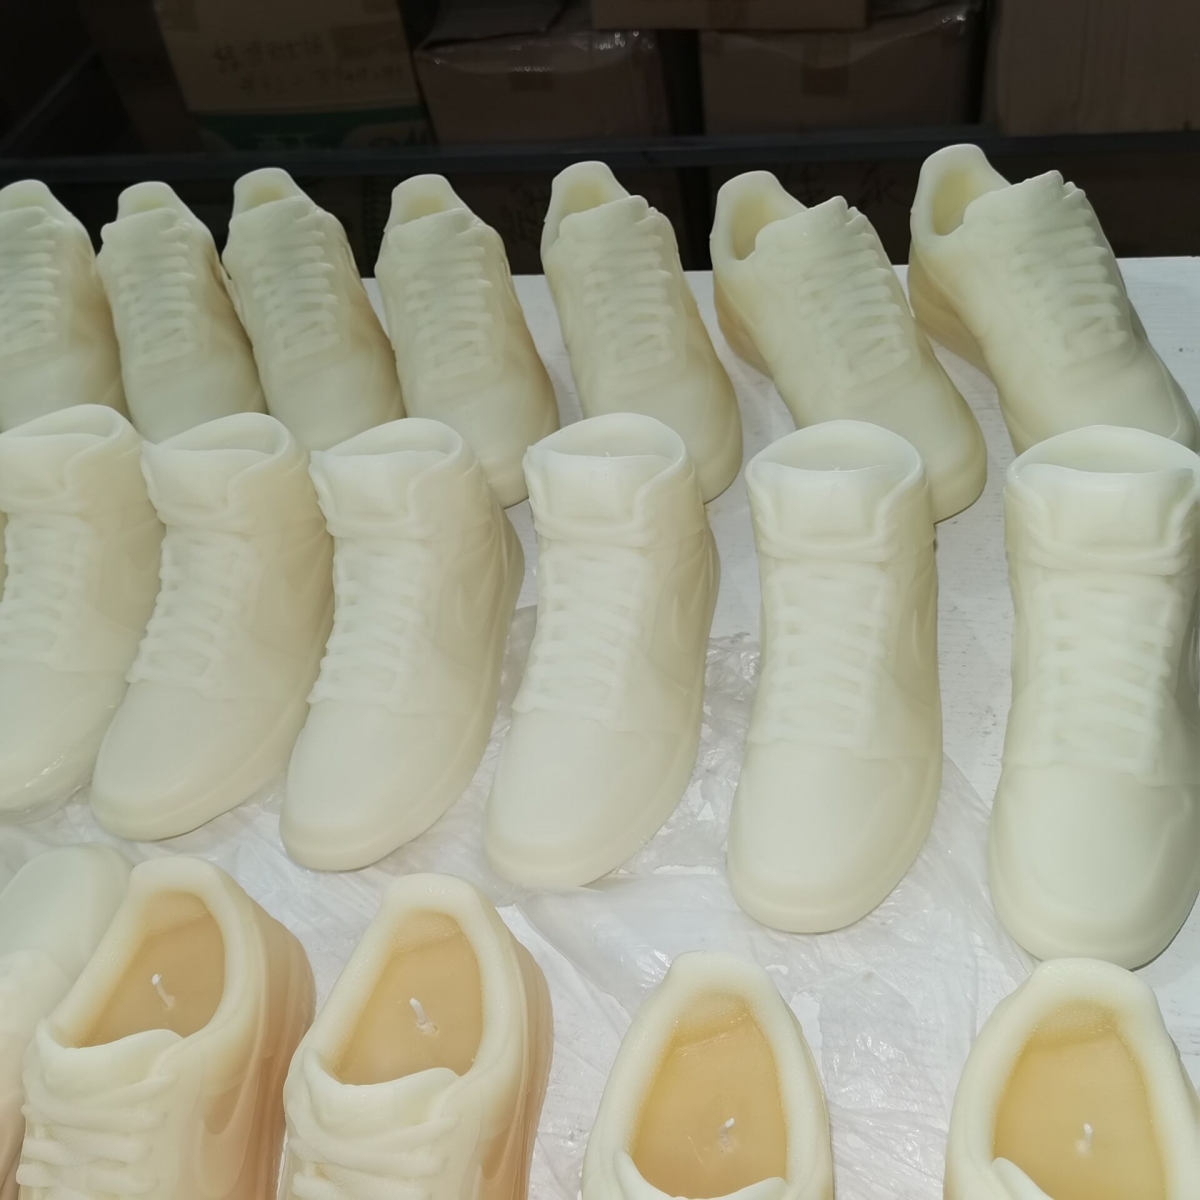 Body Candles：Female Body ,Female Figure , Sculpture Torso ,Beeswax Candles ,China Factory ,Best Price-HOWCANDLE-Candles,Scented Candles,Aromatherapy Candles,Soy Candles,Vegan Candles,Jar Candles,Pillar Candles,Candle Gift Sets,Essential Oils,Reed Diffuser,Candle Holder,